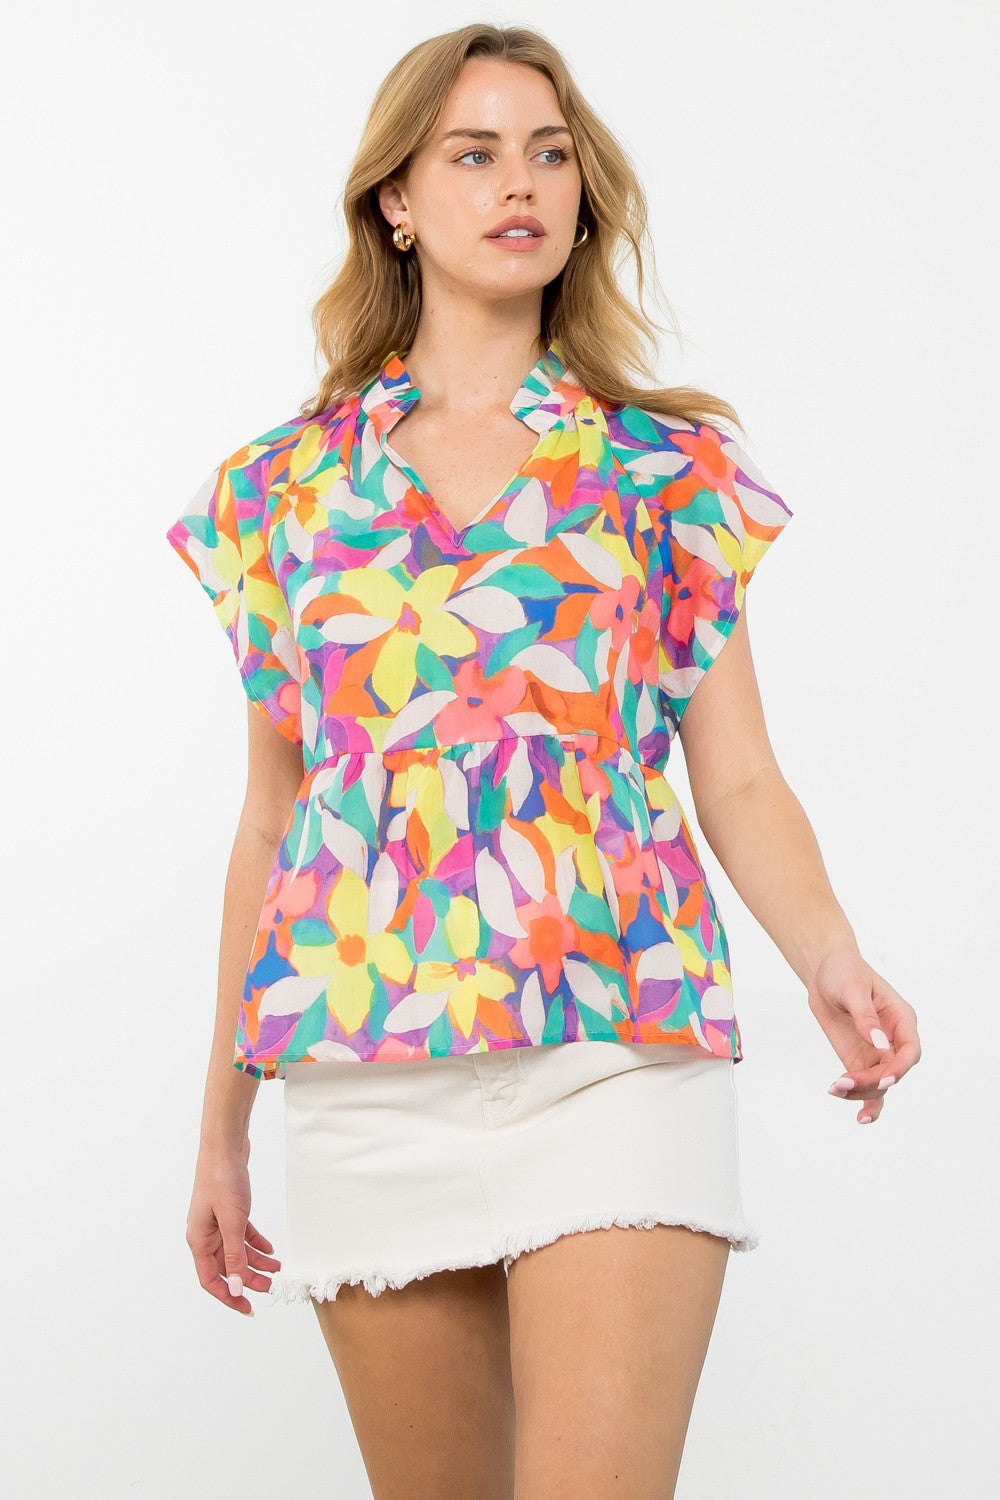 Paradise Found Top